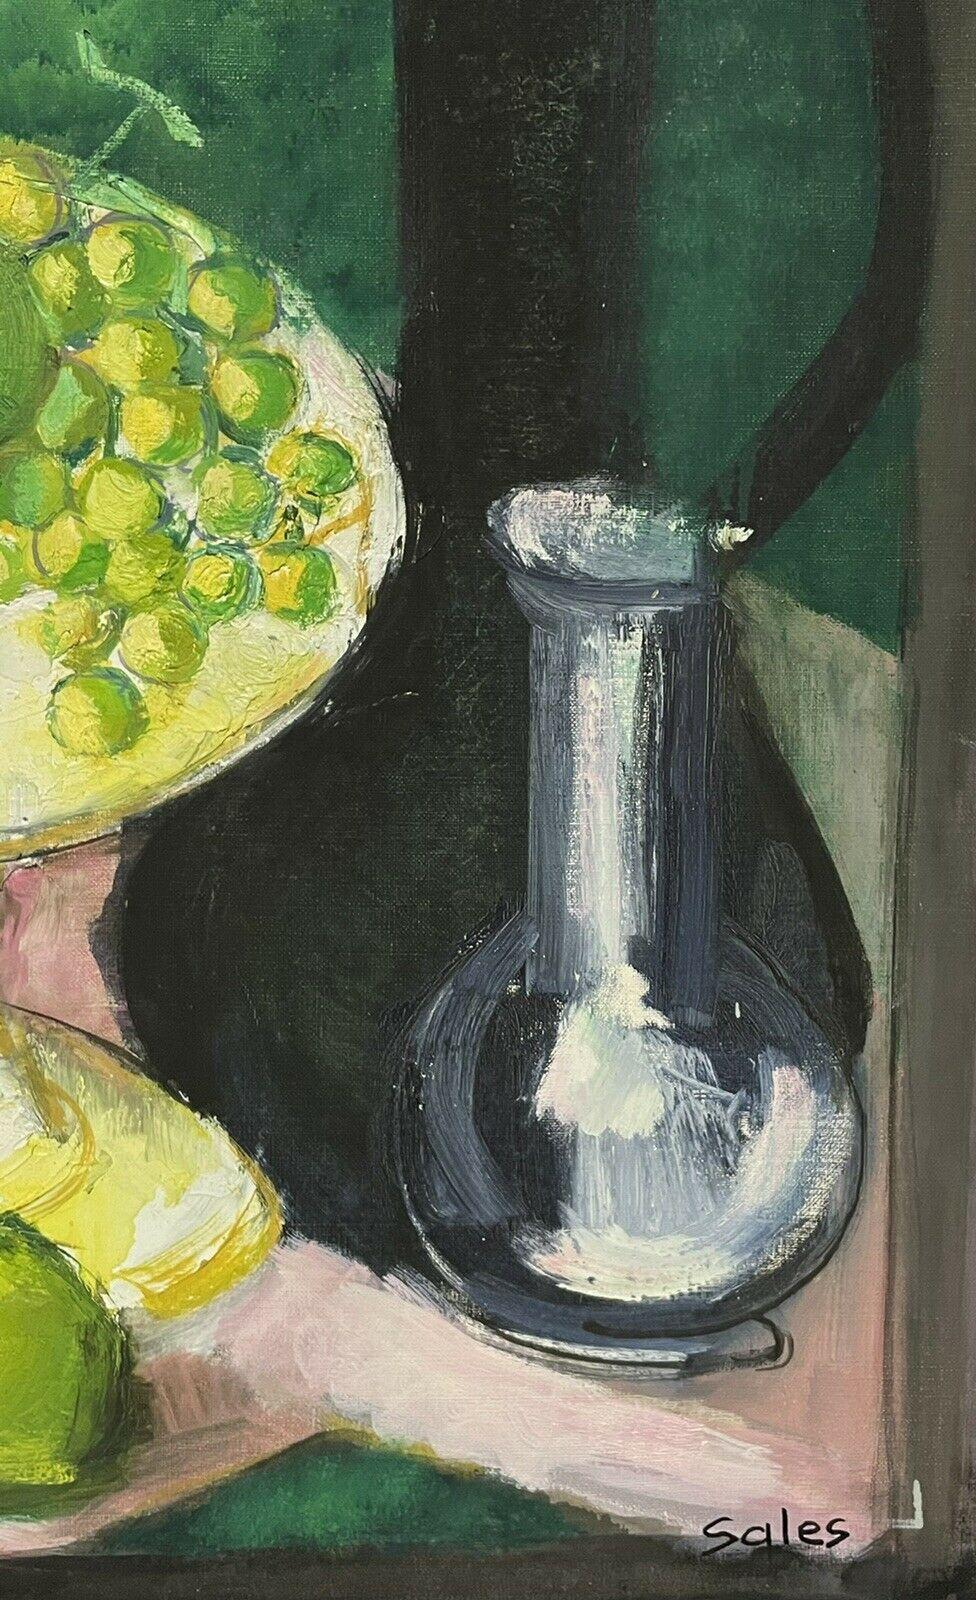 Large 1970's French Modernist Signed Oil Beautiful Still Life Fruit & Colors - Post-Impressionist Painting by Robert Sales